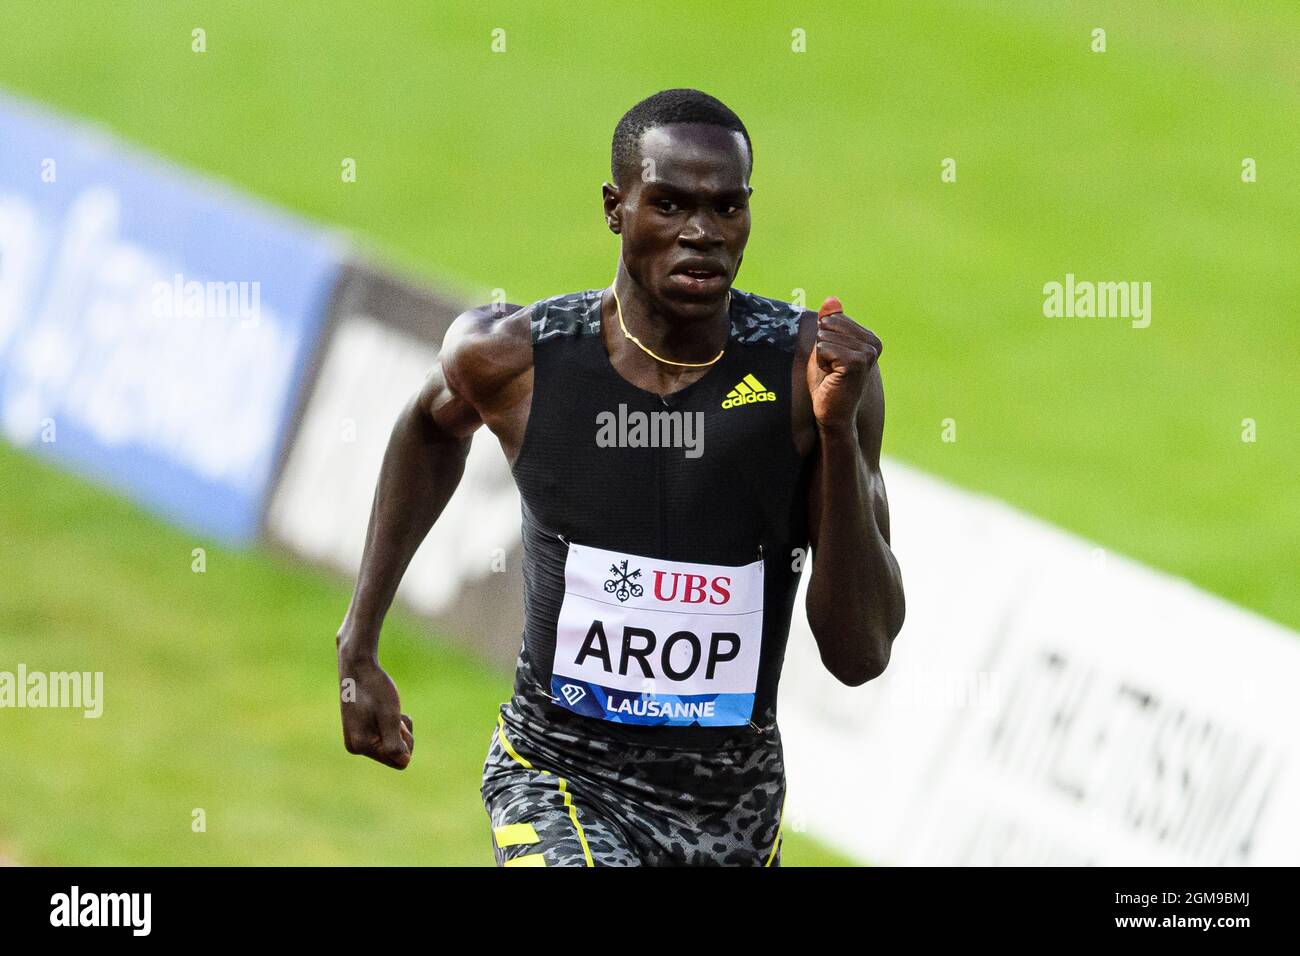 LAUSANNE, SWITZERLAND - AUGUST 26: Marco Arop of Canada runs during the  800M Men's Final during the Athletissima Lausanne 2021 at Stade Olympique  Pontaise on August 26, 2021 in Lausanne, Switzerland. (Photo